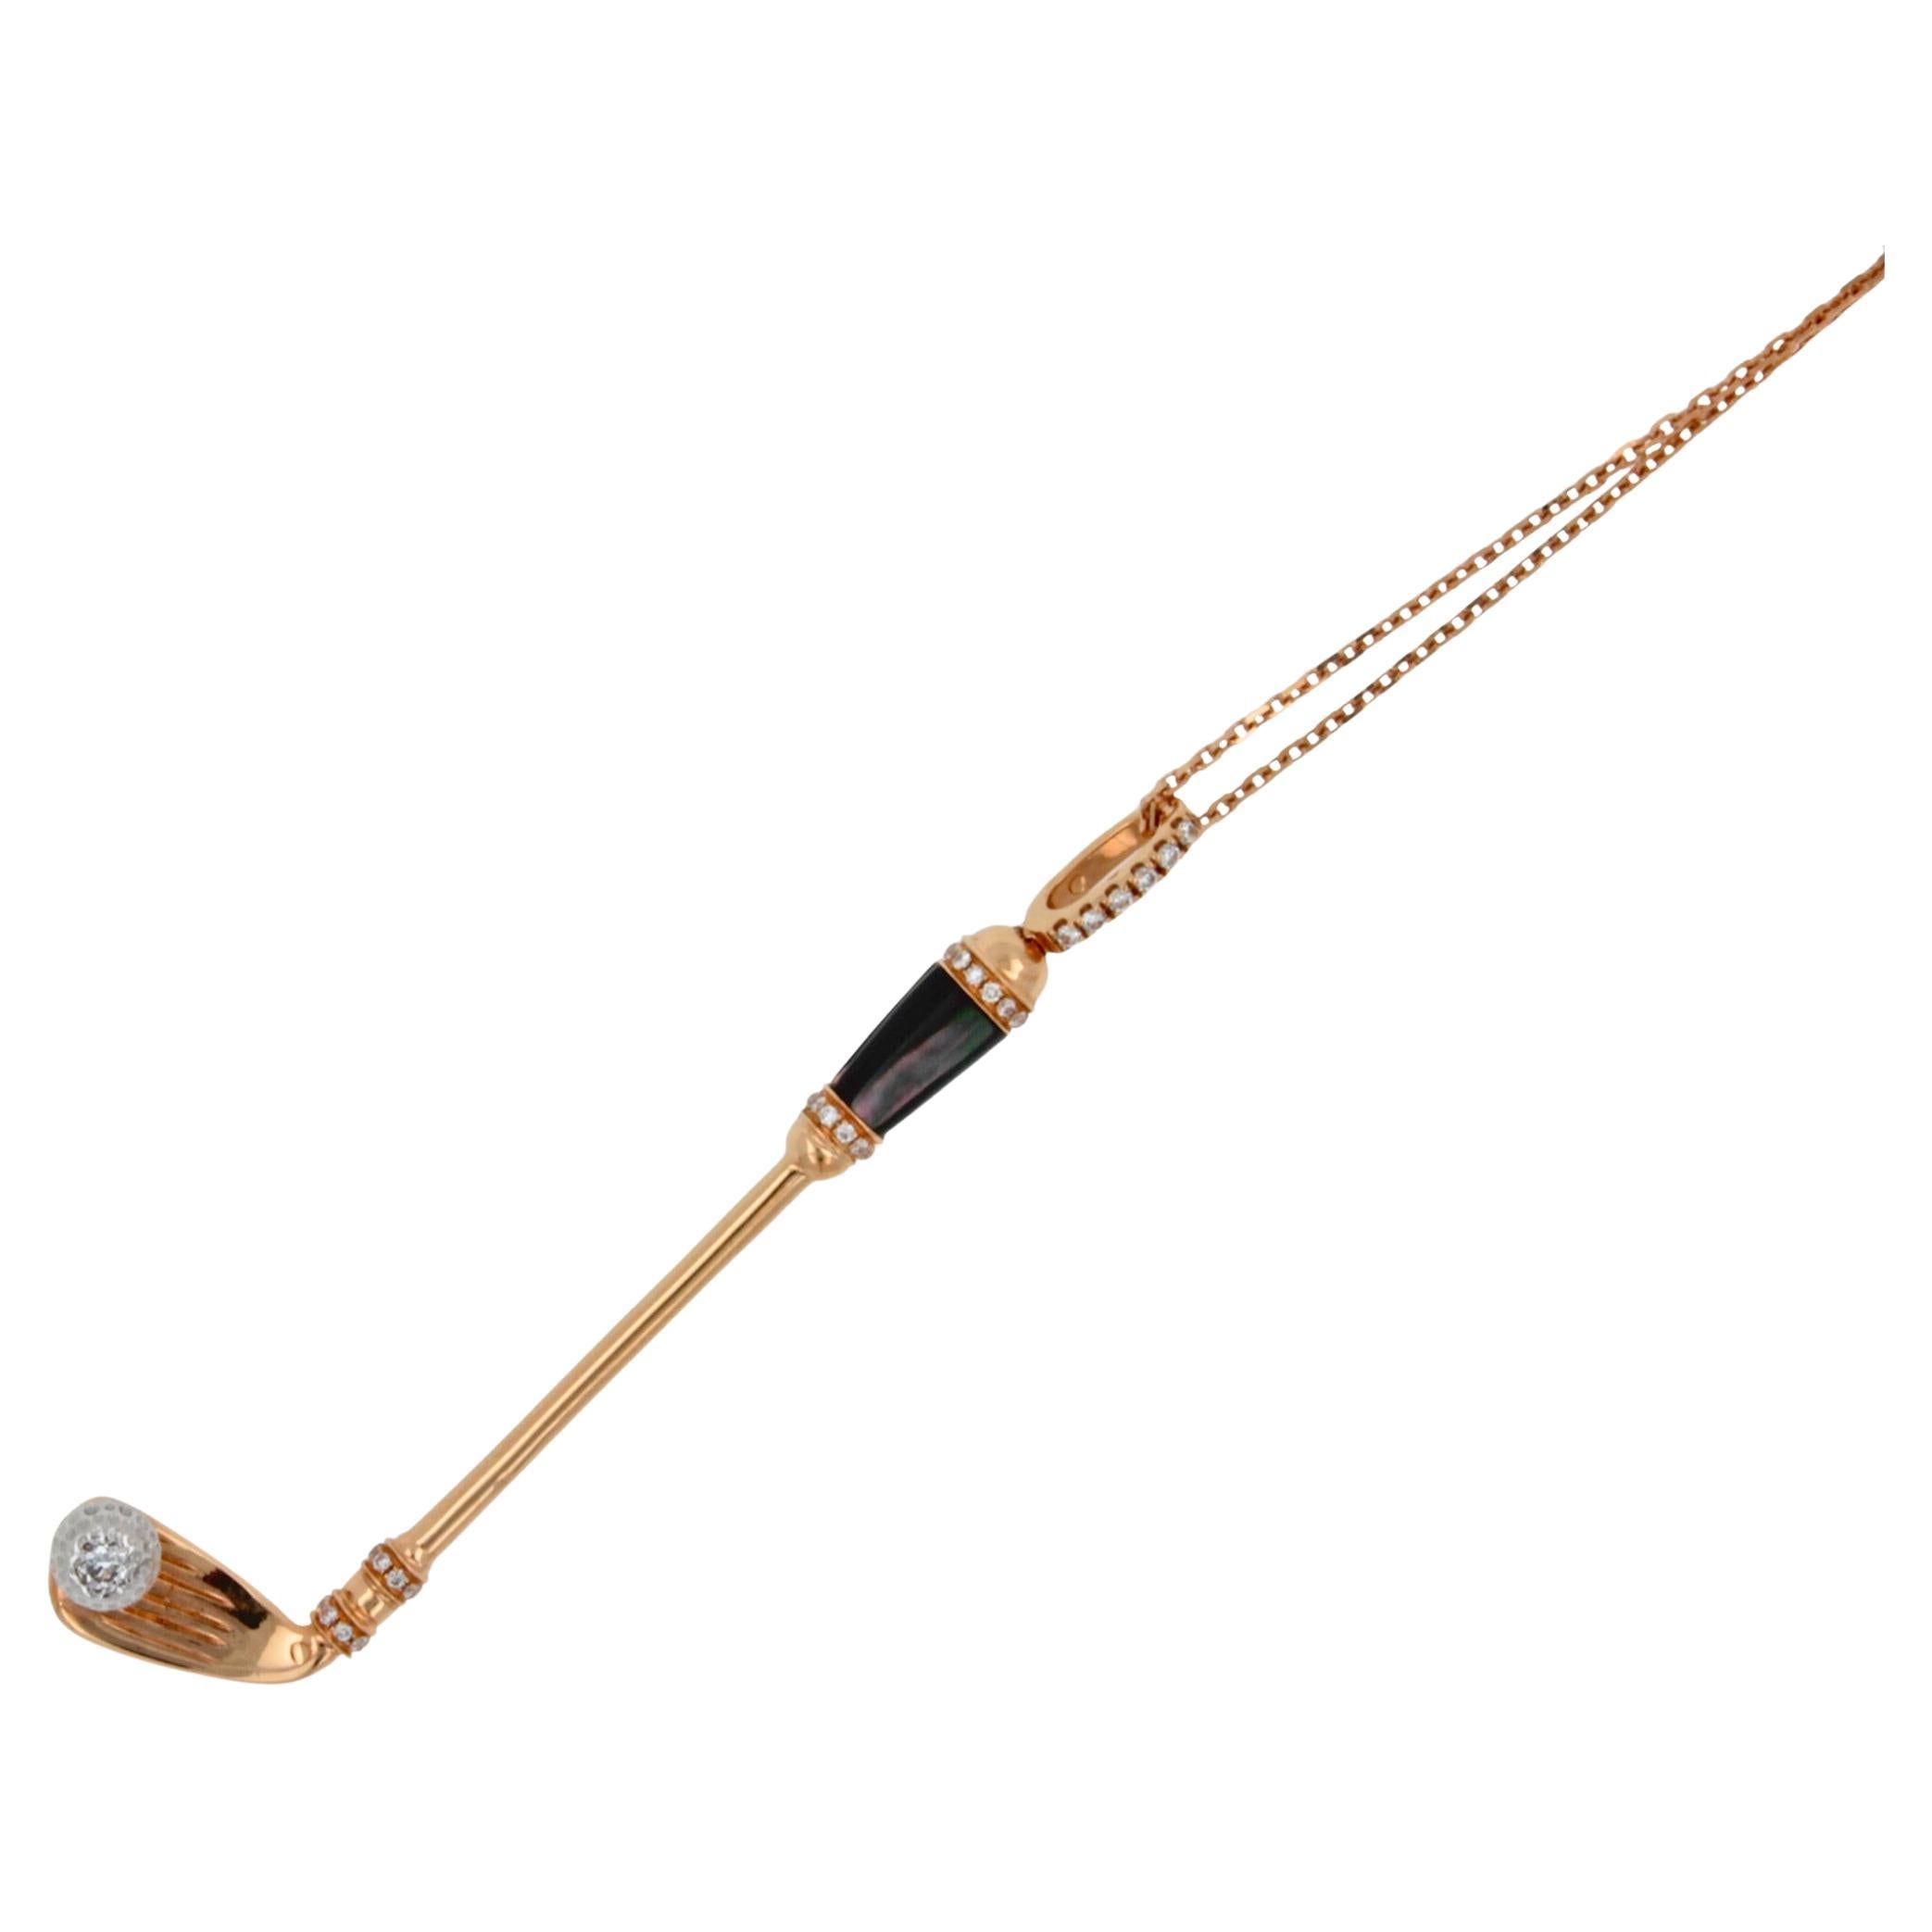 18K Rose Gold
Grey Black Mother of Pearl Gemstone Handle
White Diamond Golf Ball Gemstone
0.30 cts Diamonds
16-18 inches Diamond-Cut Link Cable chain length
In-Stock
This is part of Galt & Bro. Jewelry's exclusive, custom made-to-order Golf Club